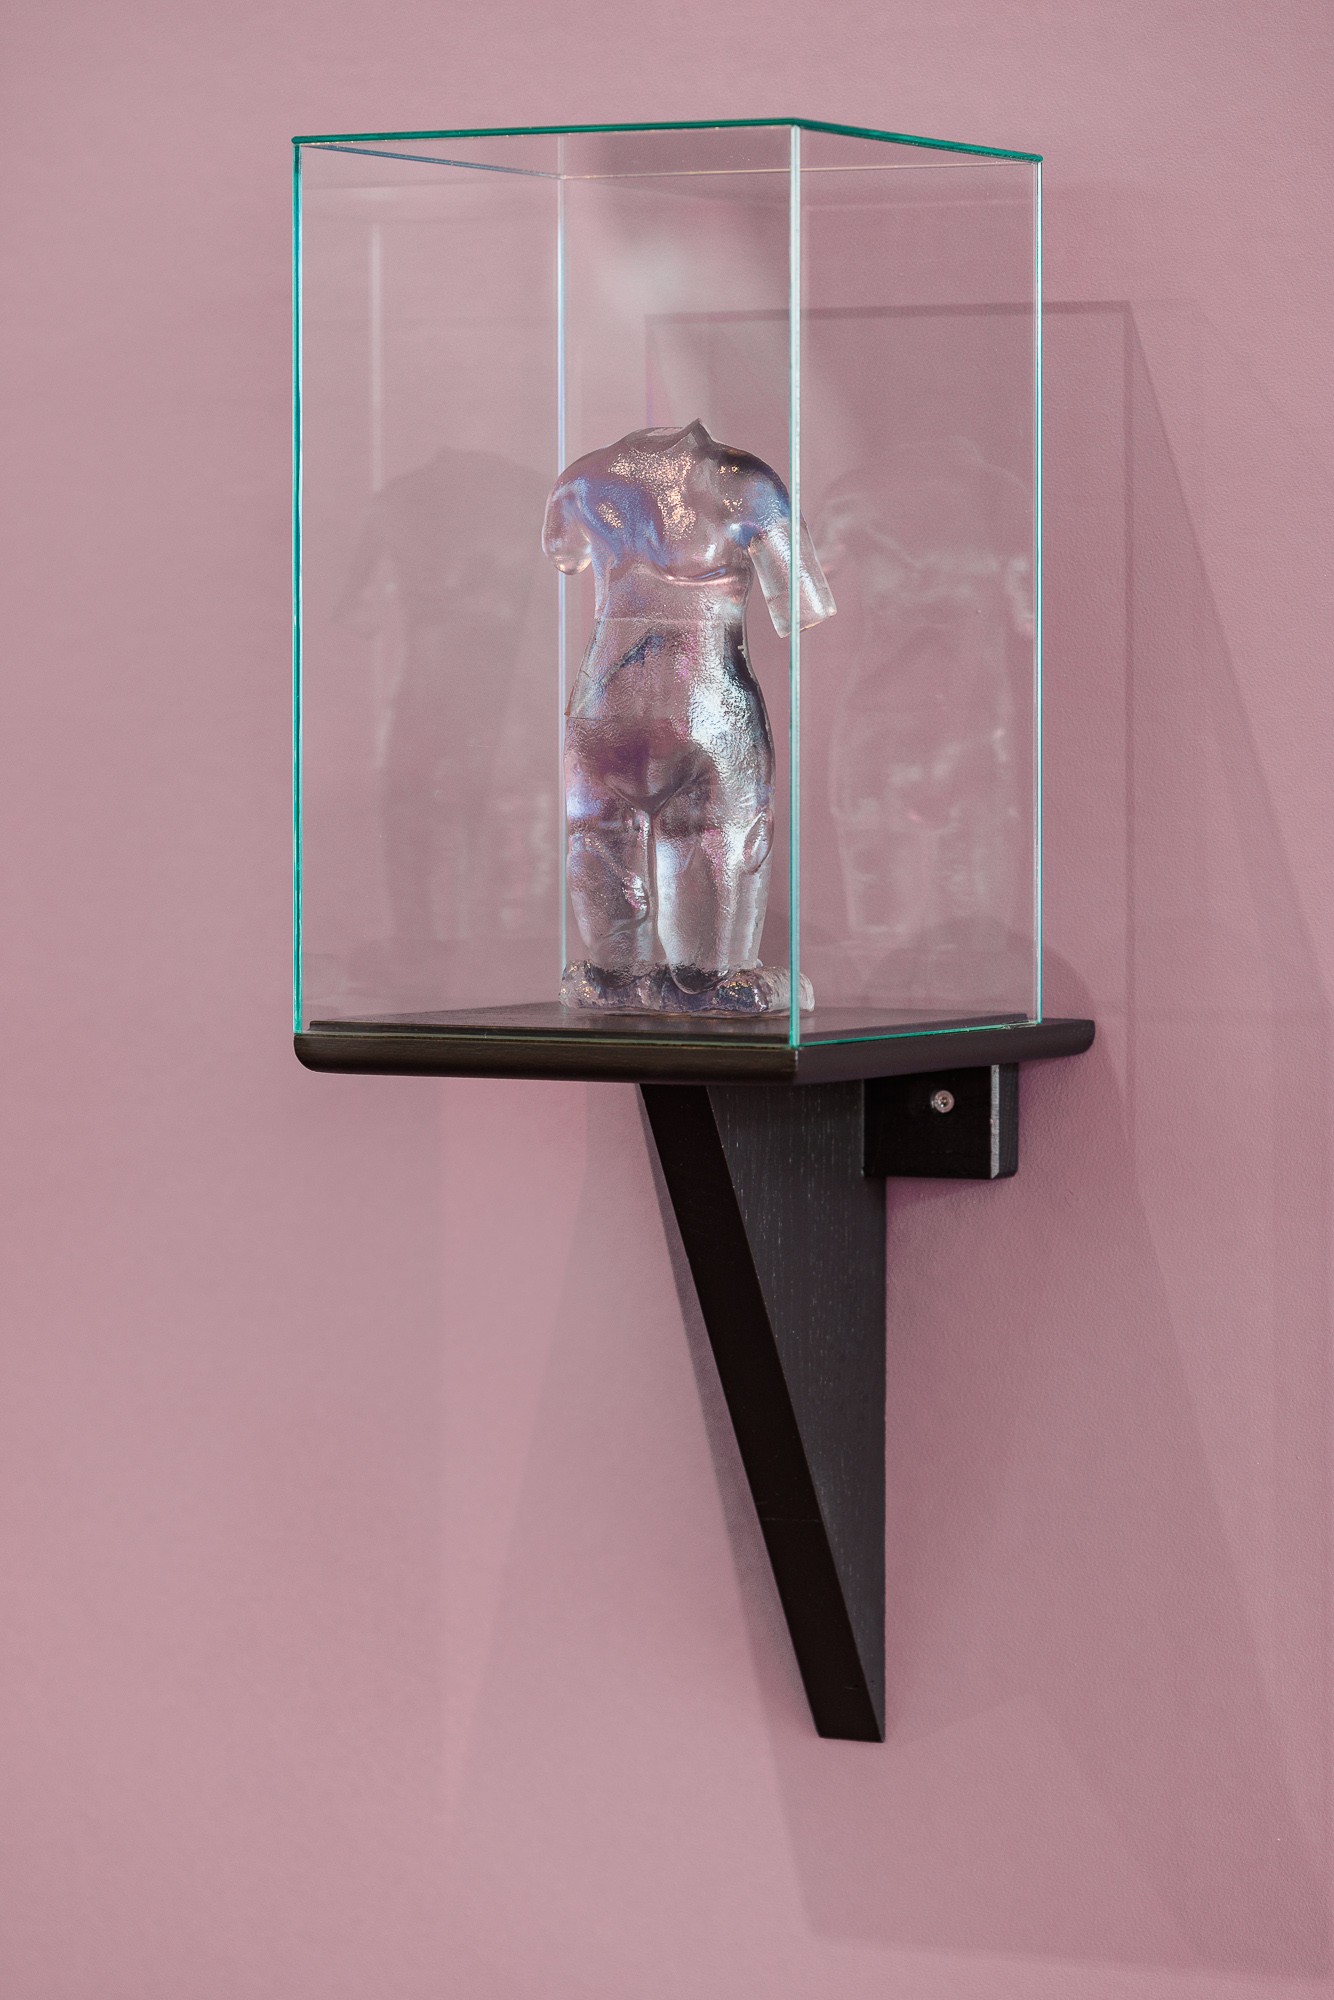 Exhibition hall, pale pink wall, on it a display cabinet with a transparent figure without a head containing a data chip